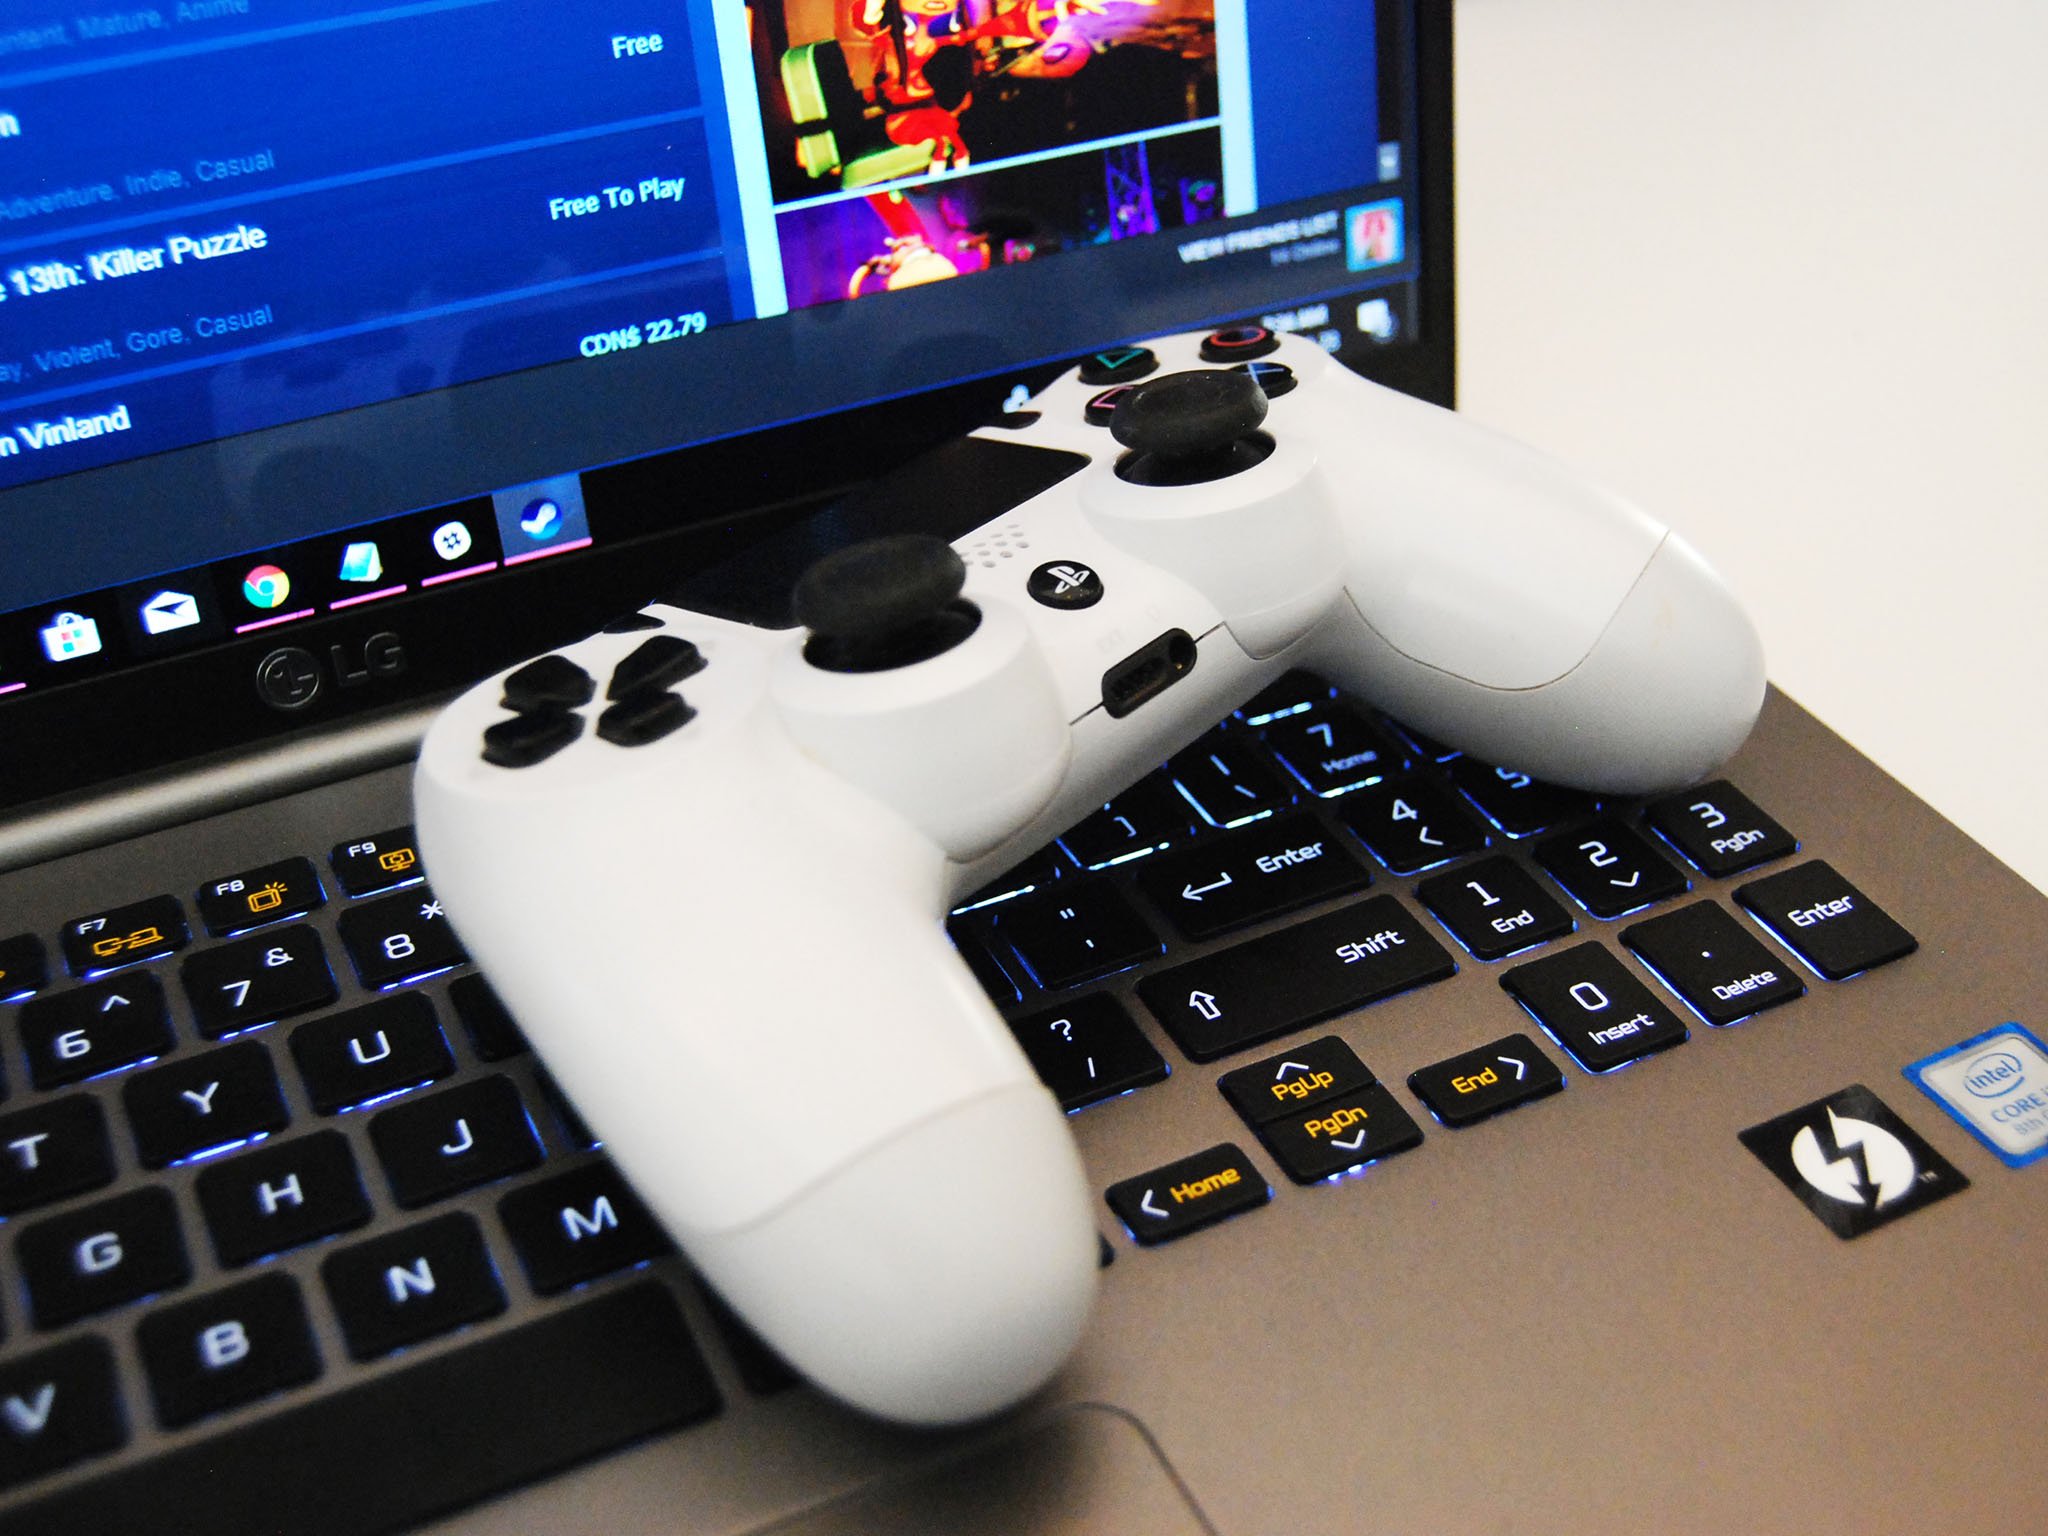 ude af drift Officer Reklame How to connect a PlayStation 4 controller to your PC | Windows Central